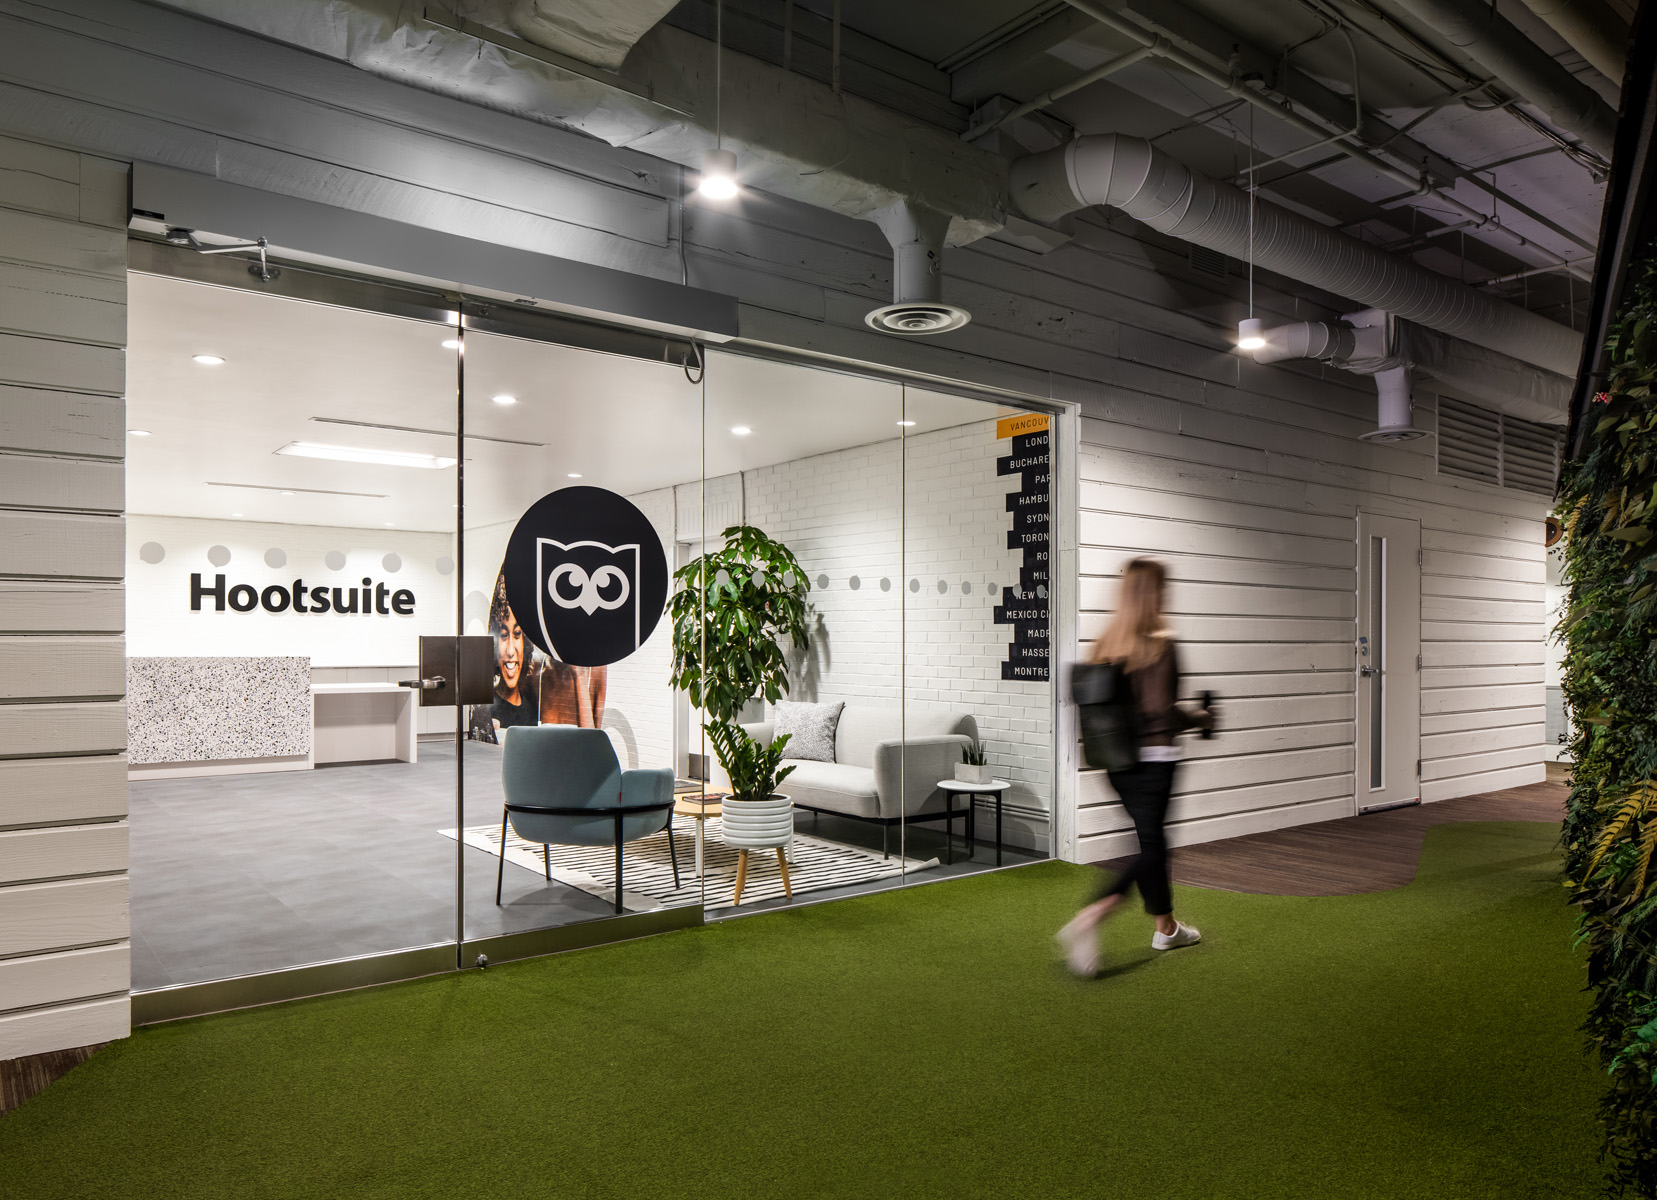 Hootsuite Vancouver - Entry Space